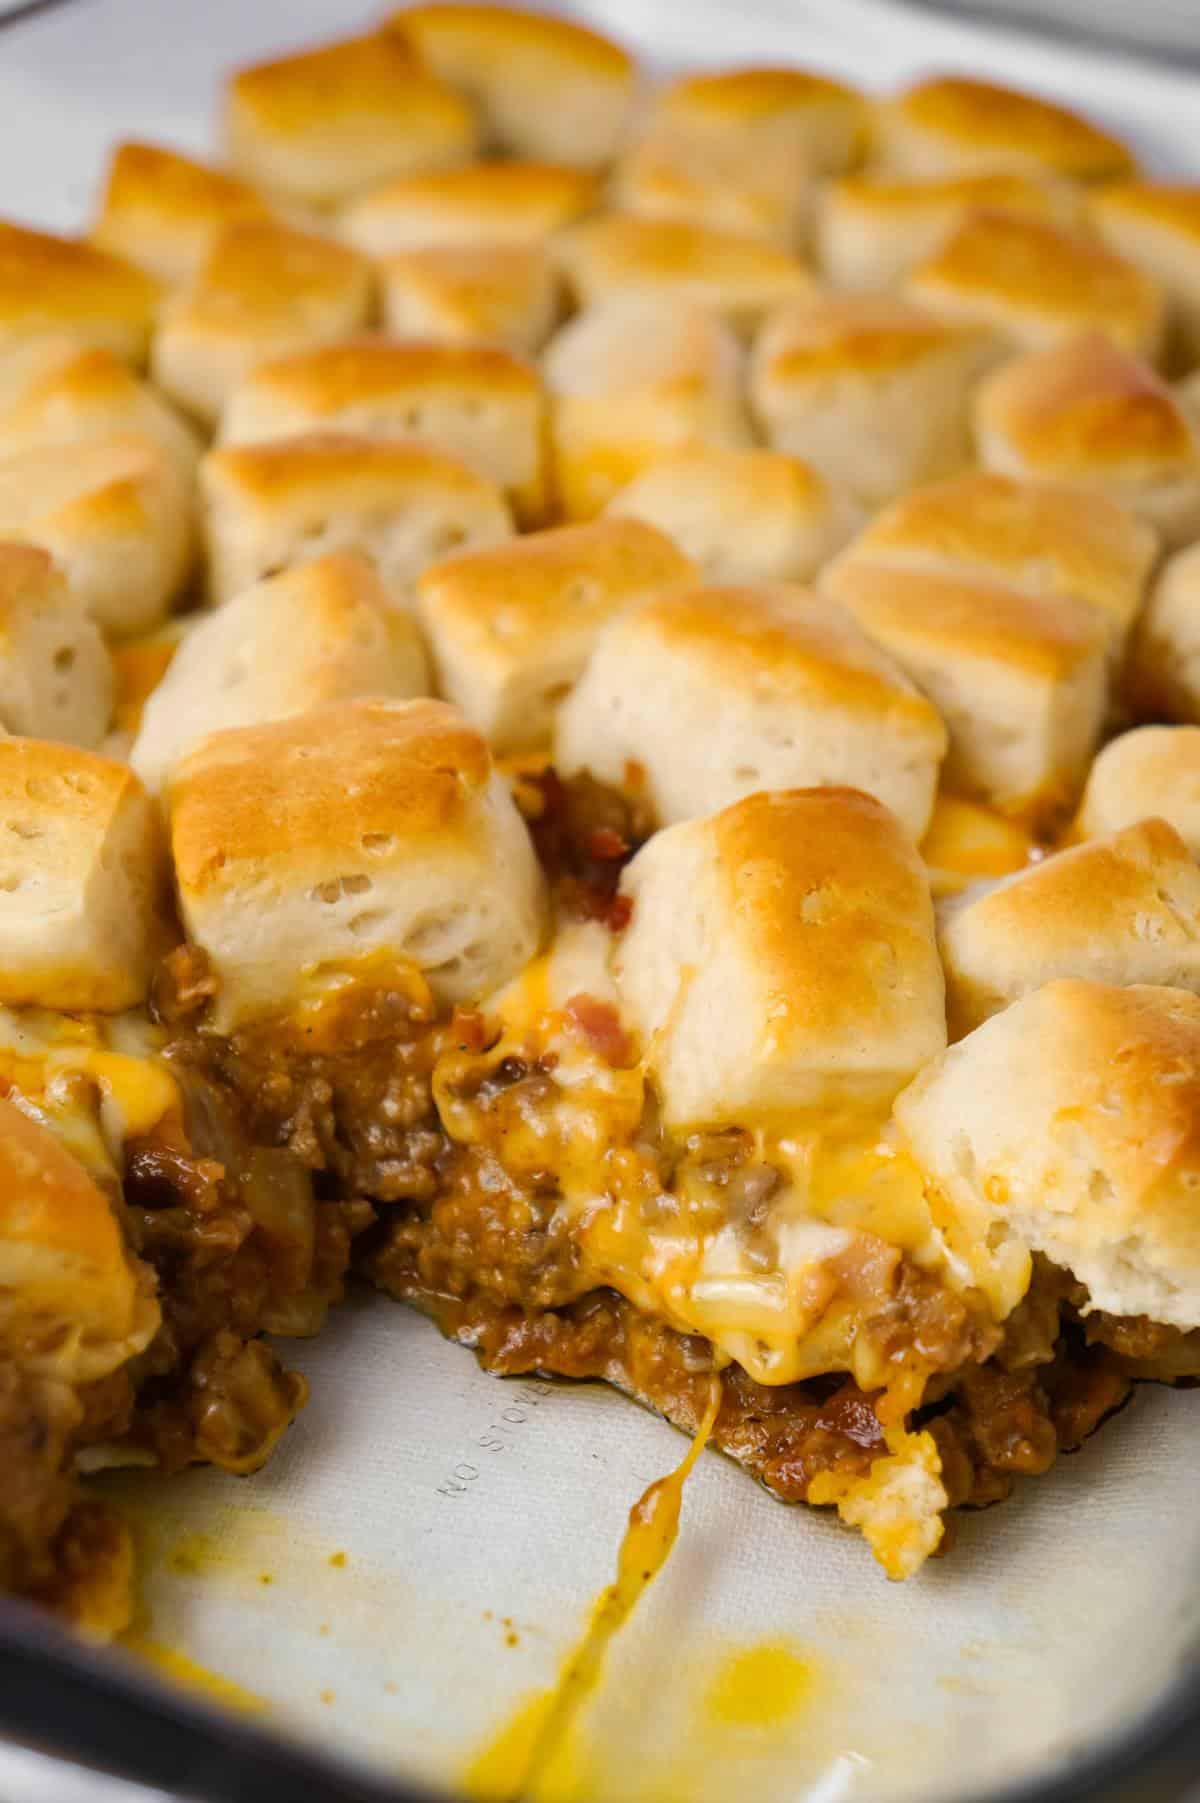 Bacon Cheeseburger Biscuit Casserole is an easy ground beef dinner recipe loaded with diced onions, condensed cheddar cheese soup, ketchup, mustard, crumbled bacon and shredded cheese all topped with pieces of Pillsbury biscuits.